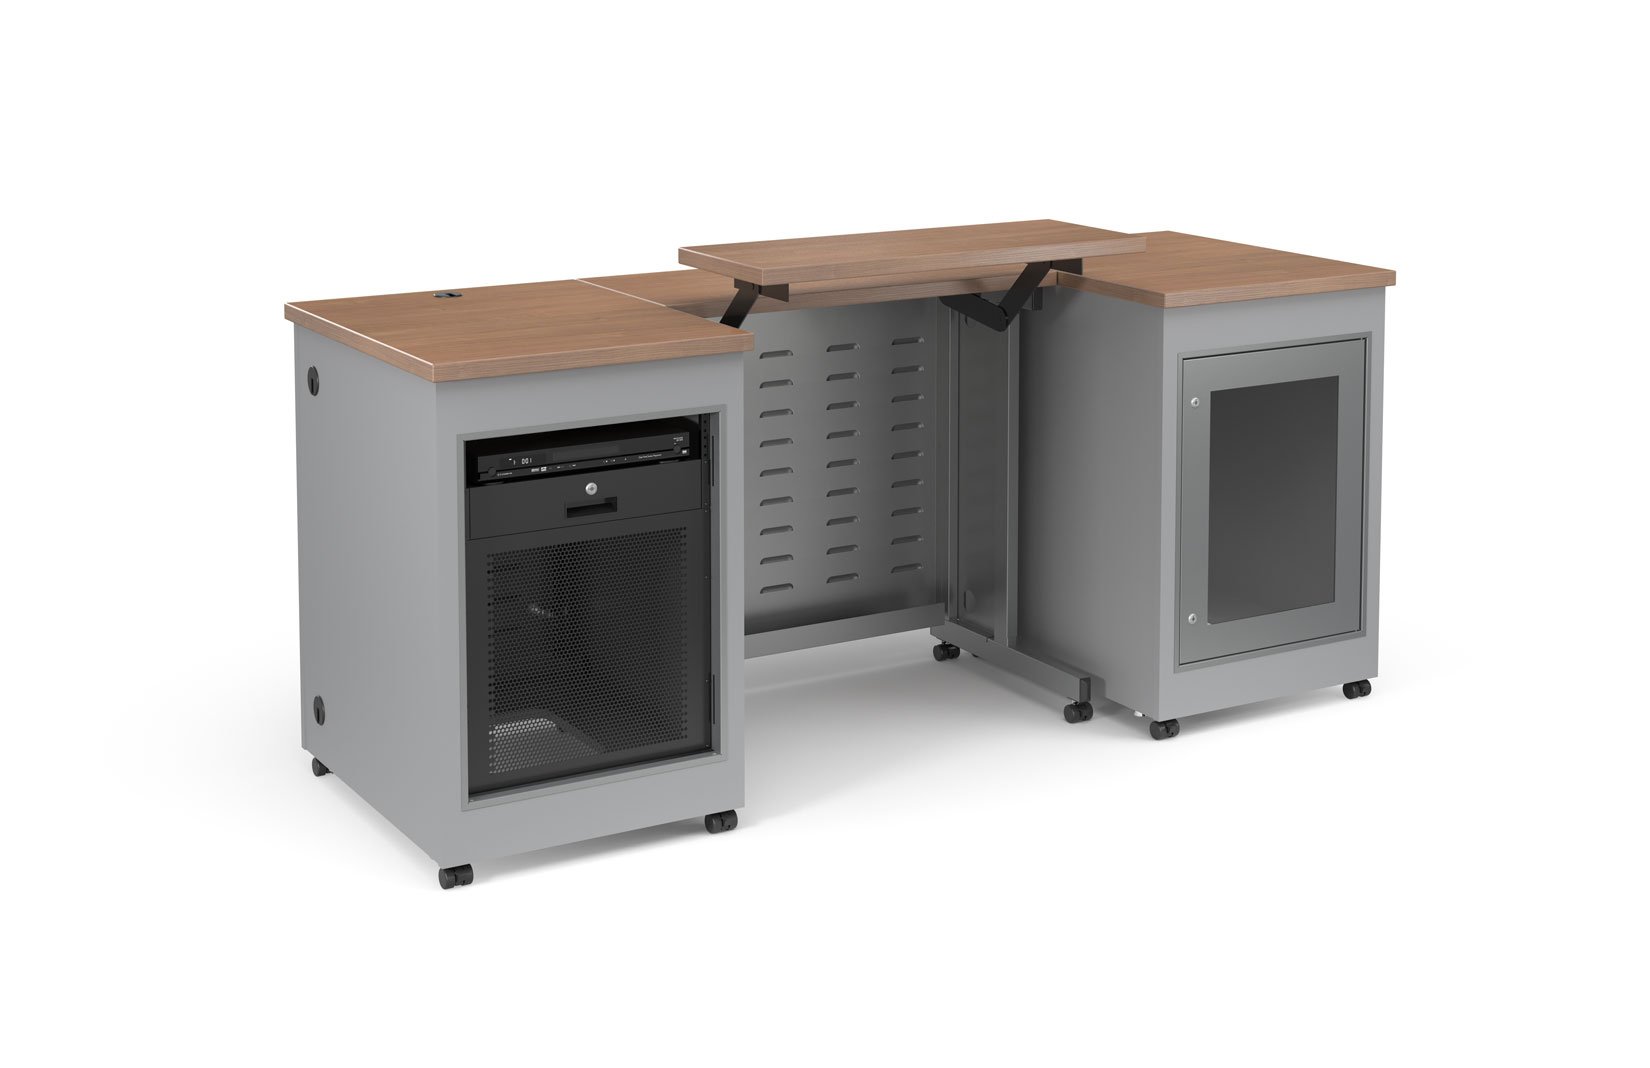 2022-08-18_Configurable_IT_Table_Lectern_and_Cabinets_Front_2.jpg